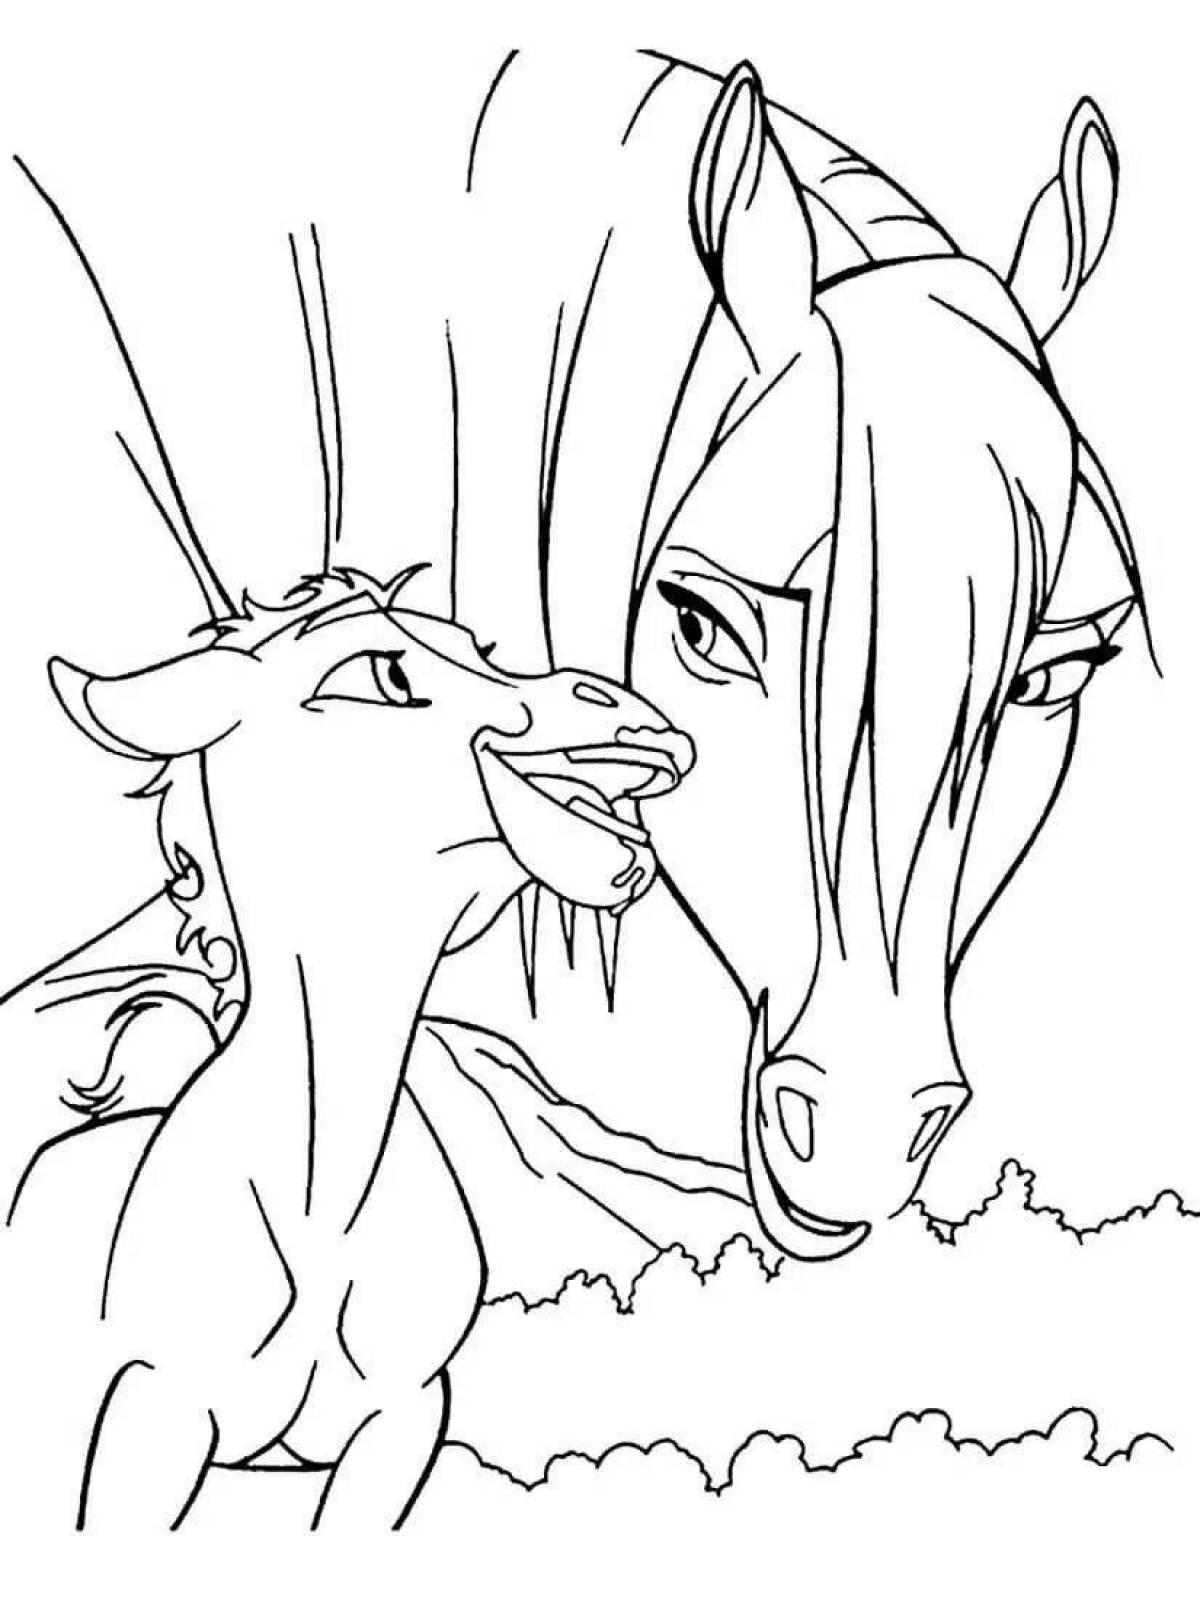 Nice horse family coloring book